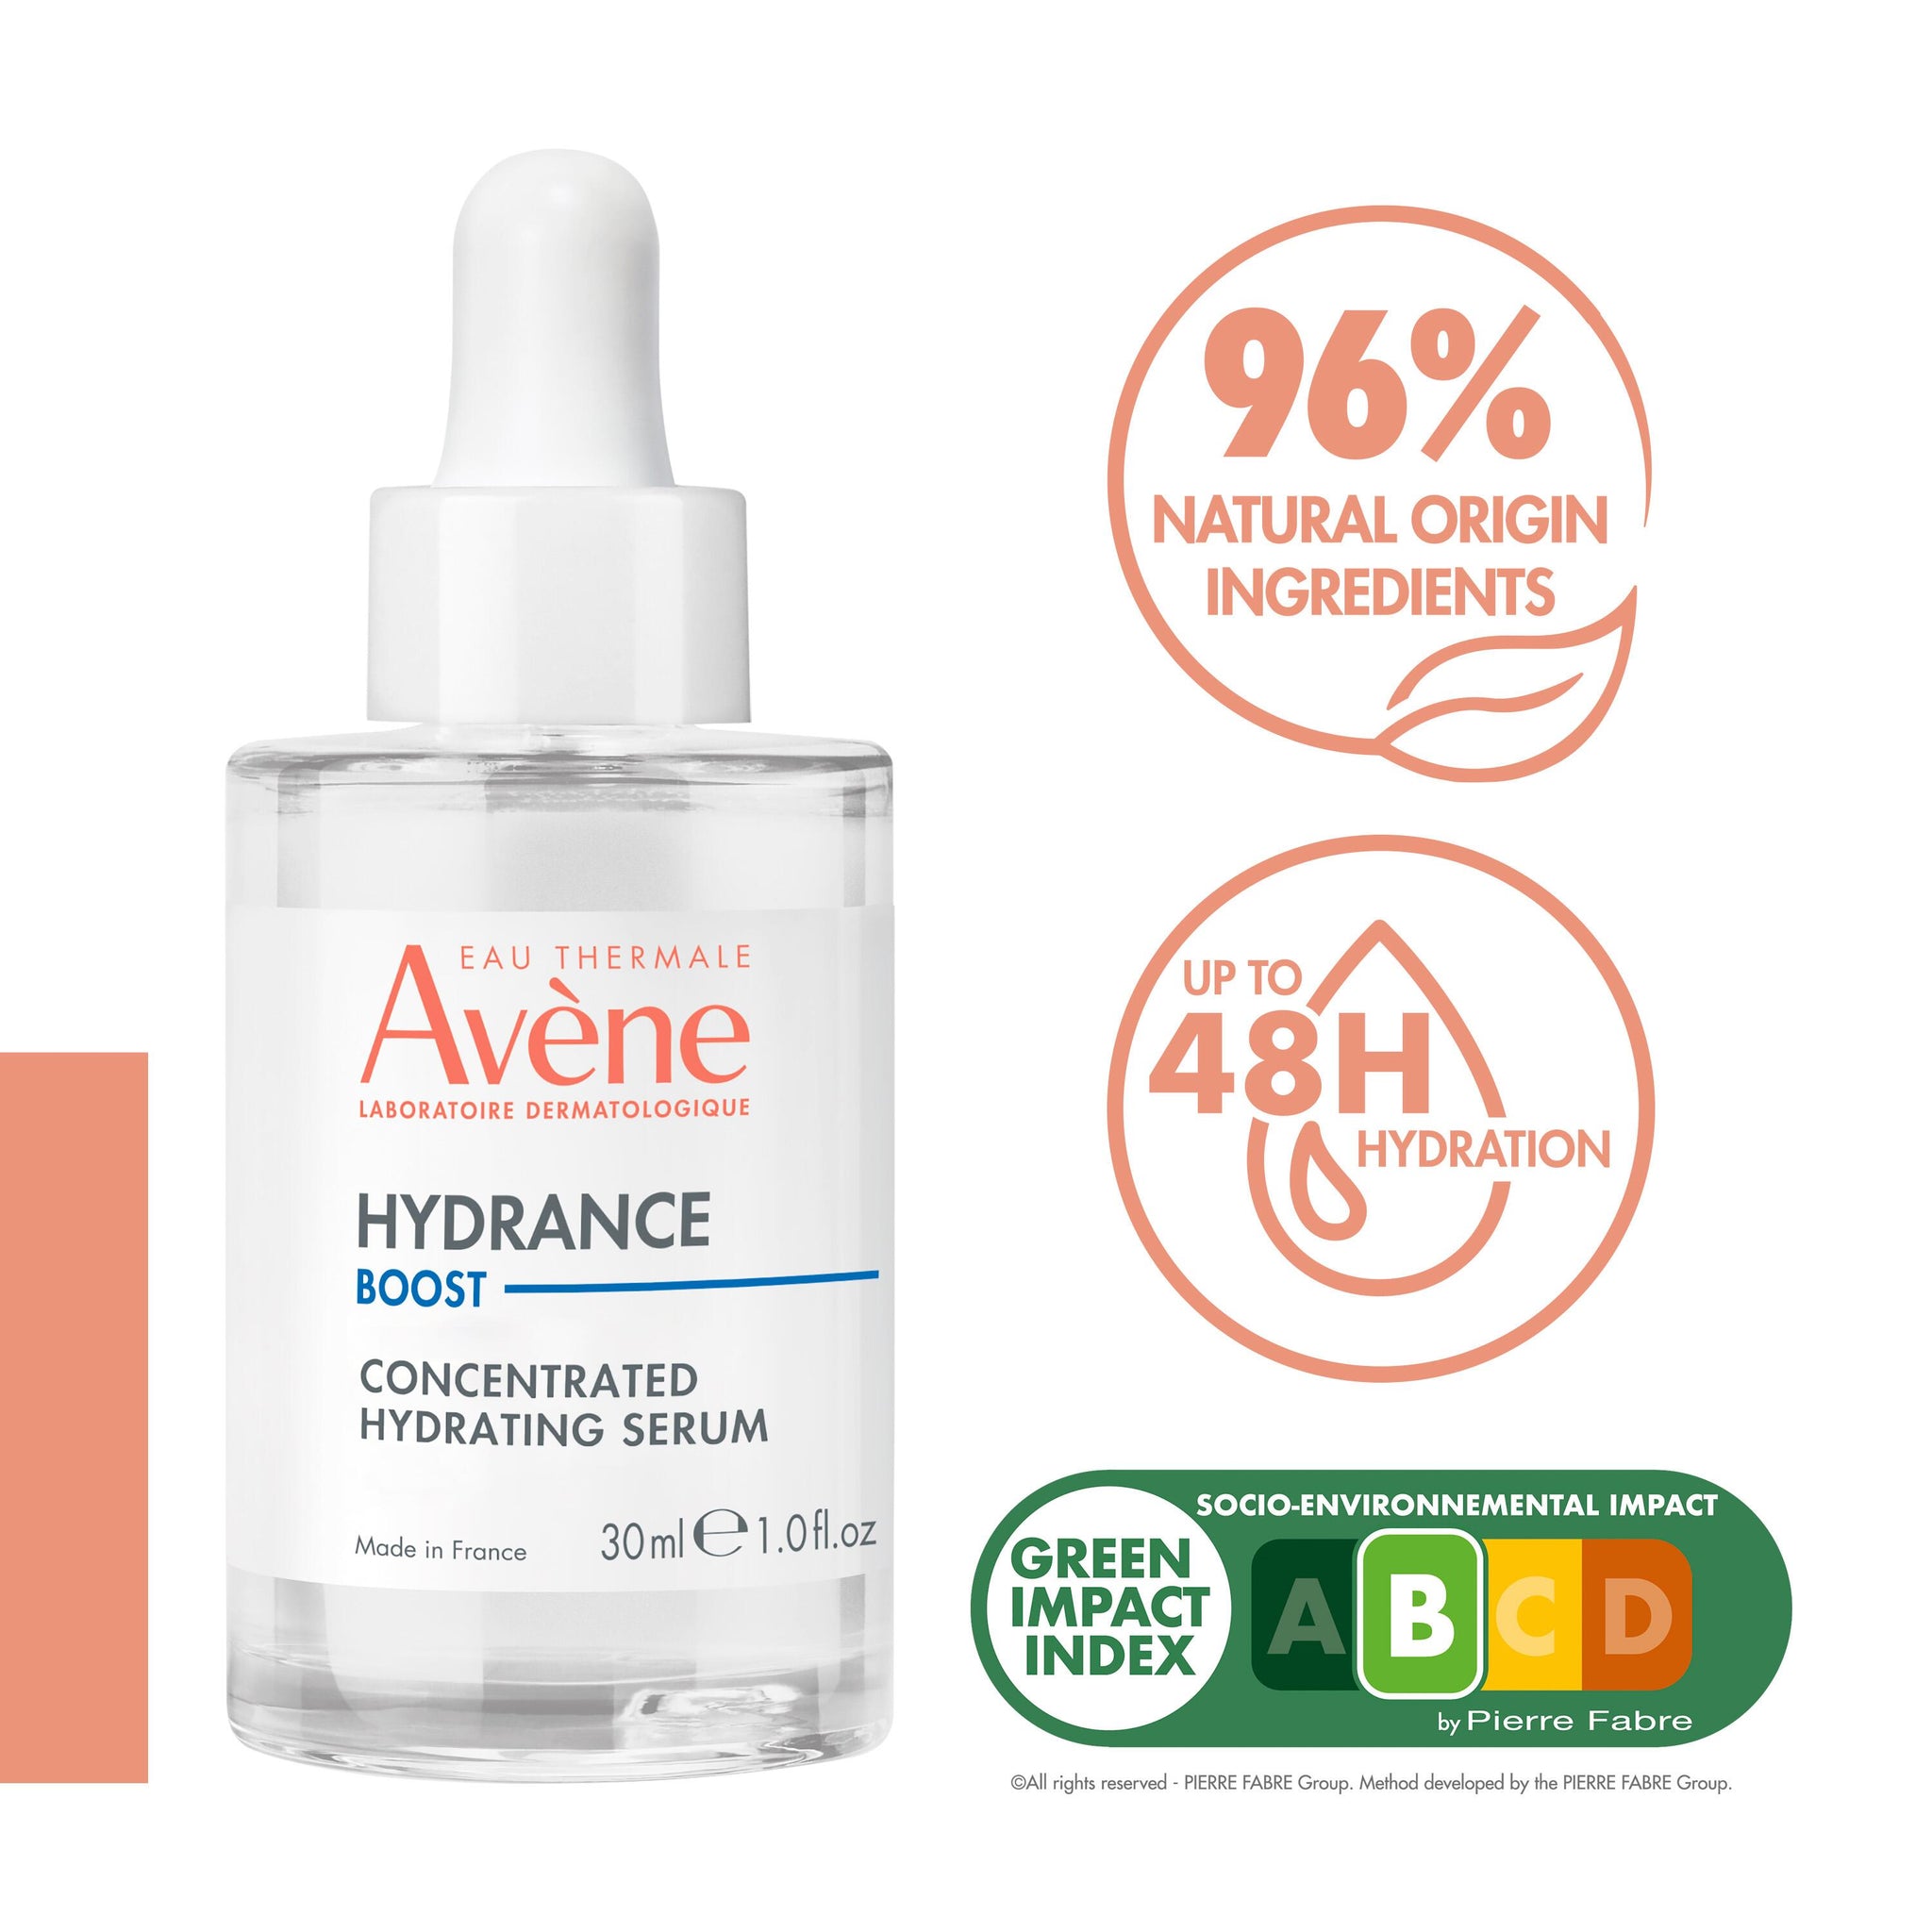 EAU THERMALE AVENE Avene Hydrance Boost Concentrated Hydrating Serum  (Provides Intense Hydration for 48hrs) 30ml, Derma Skin Care